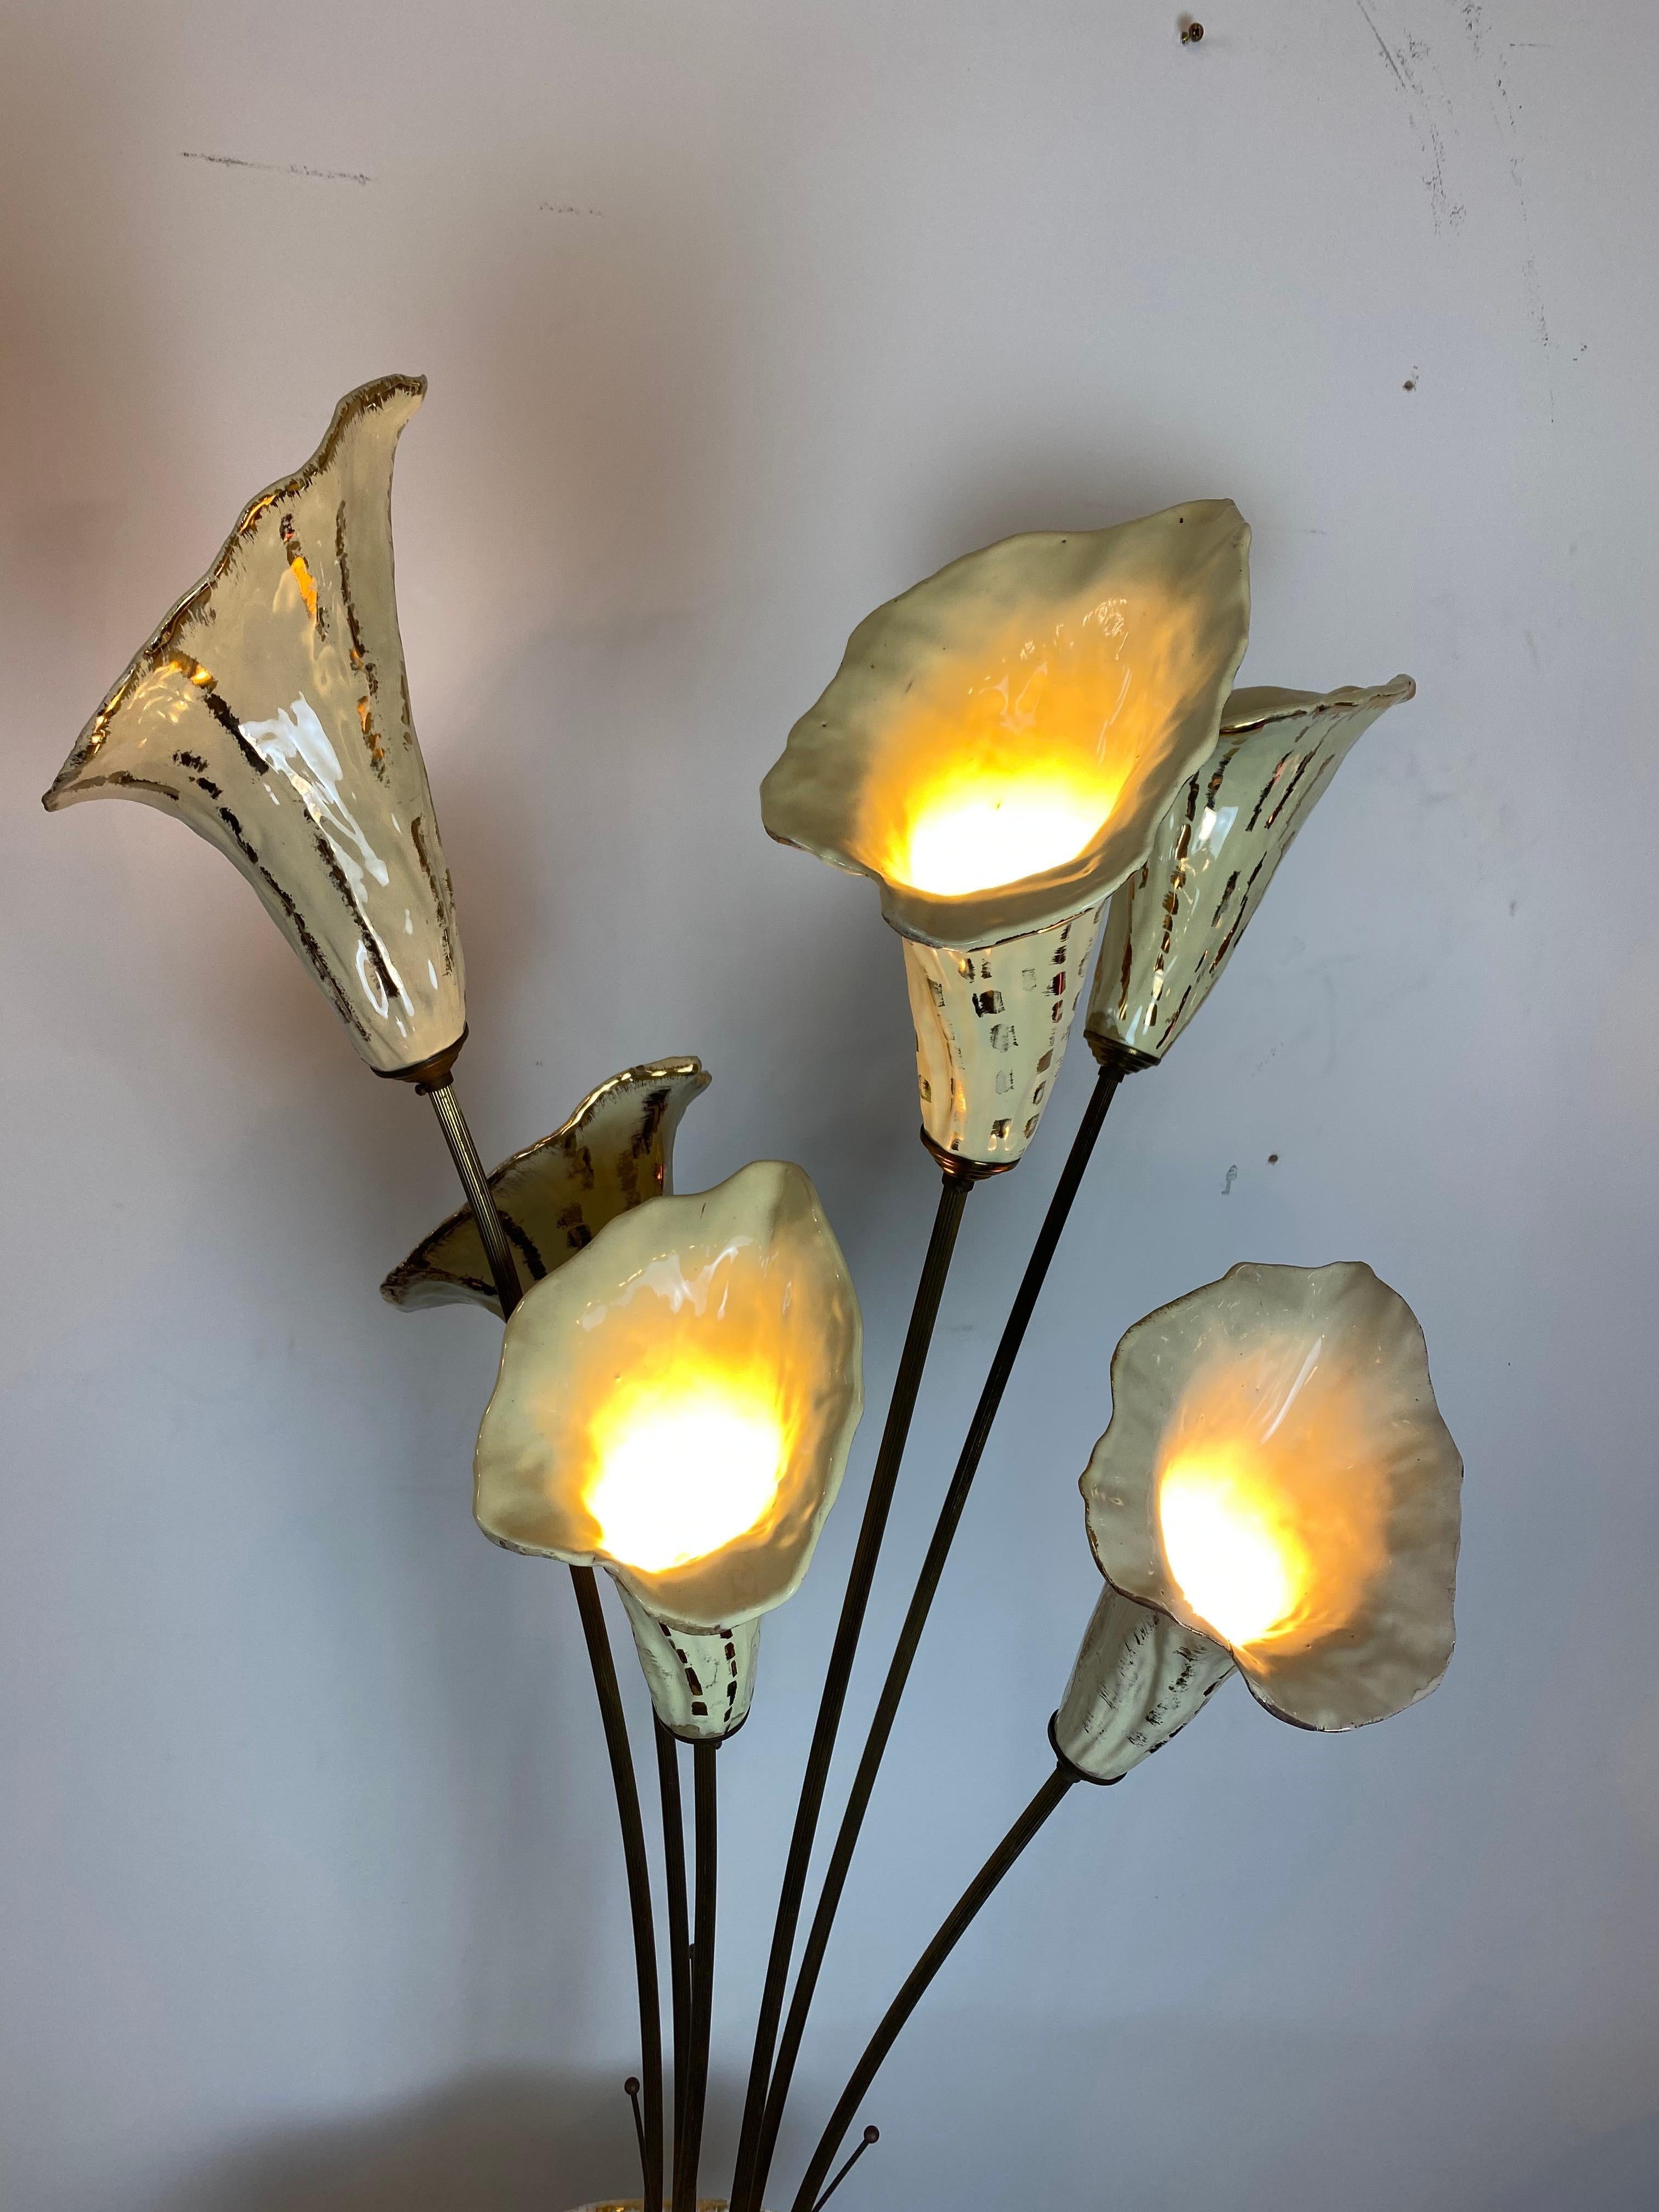 An extraordinary Italian ceramic floor lamp depicting a vase with 6 tall Lilies on brass stems, each holding a lamp. The tall vase is hand painted with Alpine scenery, gilt details and sits on a brass surrounded wood base.